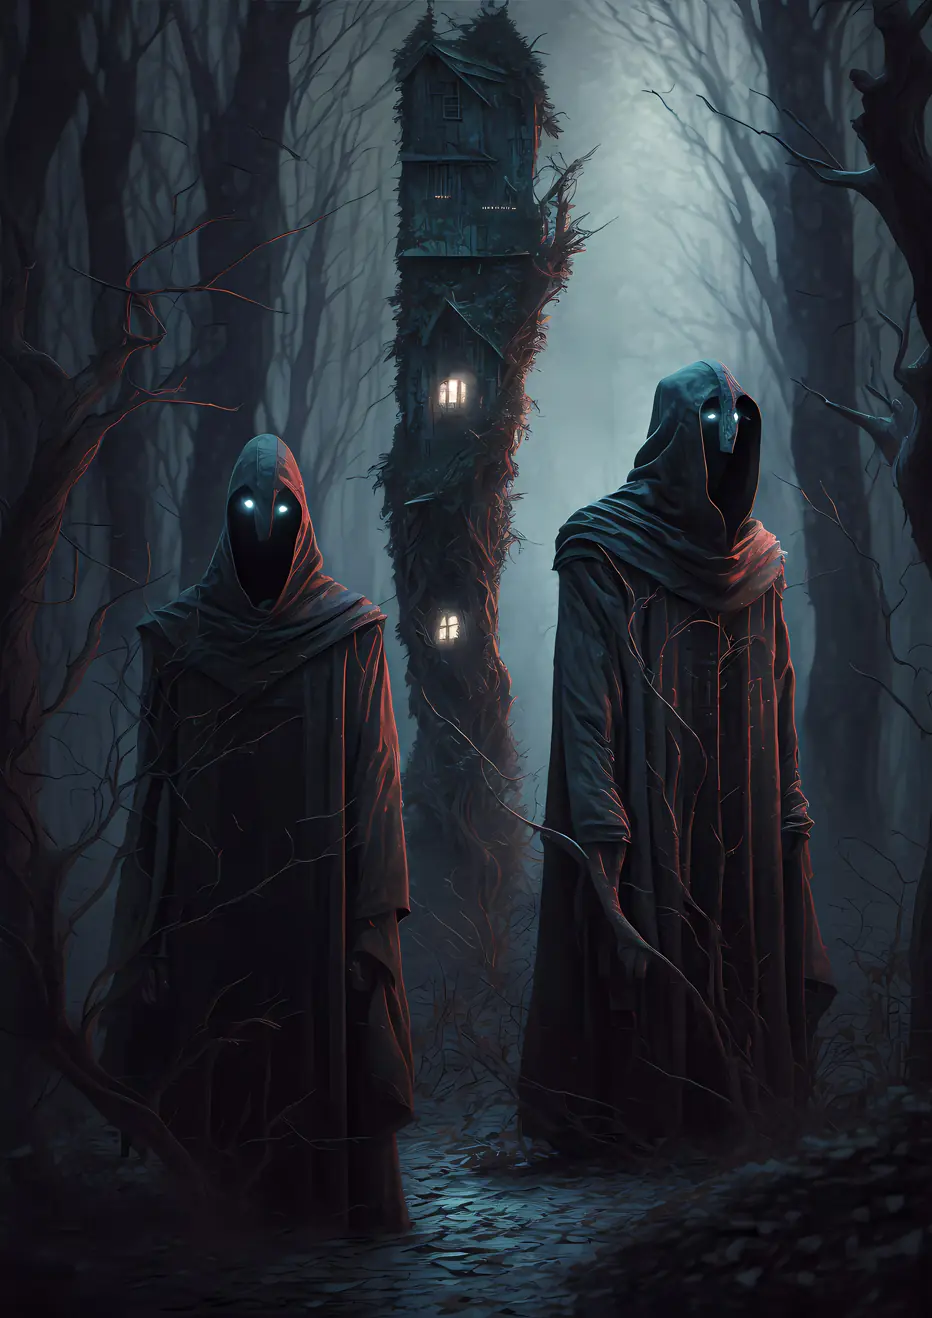 Mysterious figures in a foggy forest, guarding a totem-like structure. Dark and haunting art - 'The Watchers'